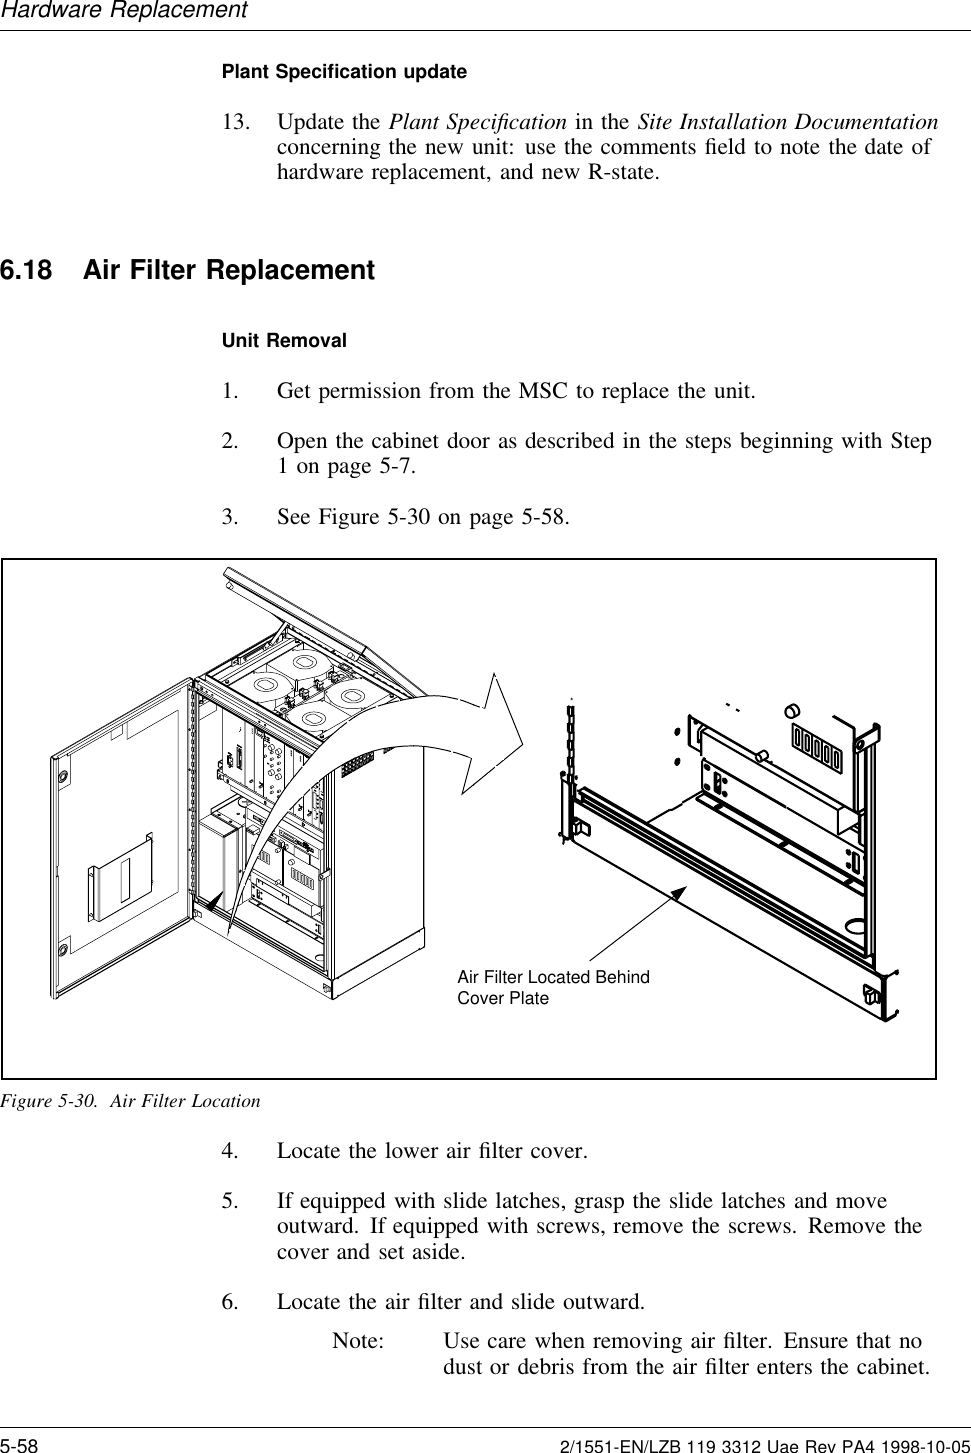 Hardware ReplacementPlant Speciﬁcation update13. Update the Plant Speciﬁcation in the Site Installation Documentationconcerning the new unit: use the comments ﬁeld to note the date ofhardware replacement, and new R-state.6.18 Air Filter ReplacementUnit Removal1. Get permission from the MSC to replace the unit.2. Open the cabinet door as described in the steps beginning with Step1 on page 5-7.3. See Figure 5-30 on page 5-58.Air Filter Located BehindCover PlateFigure 5-30. Air Filter Location4. Locate the lower air ﬁlter cover.5. If equipped with slide latches, grasp the slide latches and moveoutward. If equipped with screws, remove the screws. Remove thecover and set aside.6. Locate the air ﬁlter and slide outward.Note: Use care when removing air ﬁlter. Ensure that nodust or debris from the air ﬁlter enters the cabinet.5-58 2/1551-EN/LZB 119 3312 Uae Rev PA4 1998-10-05